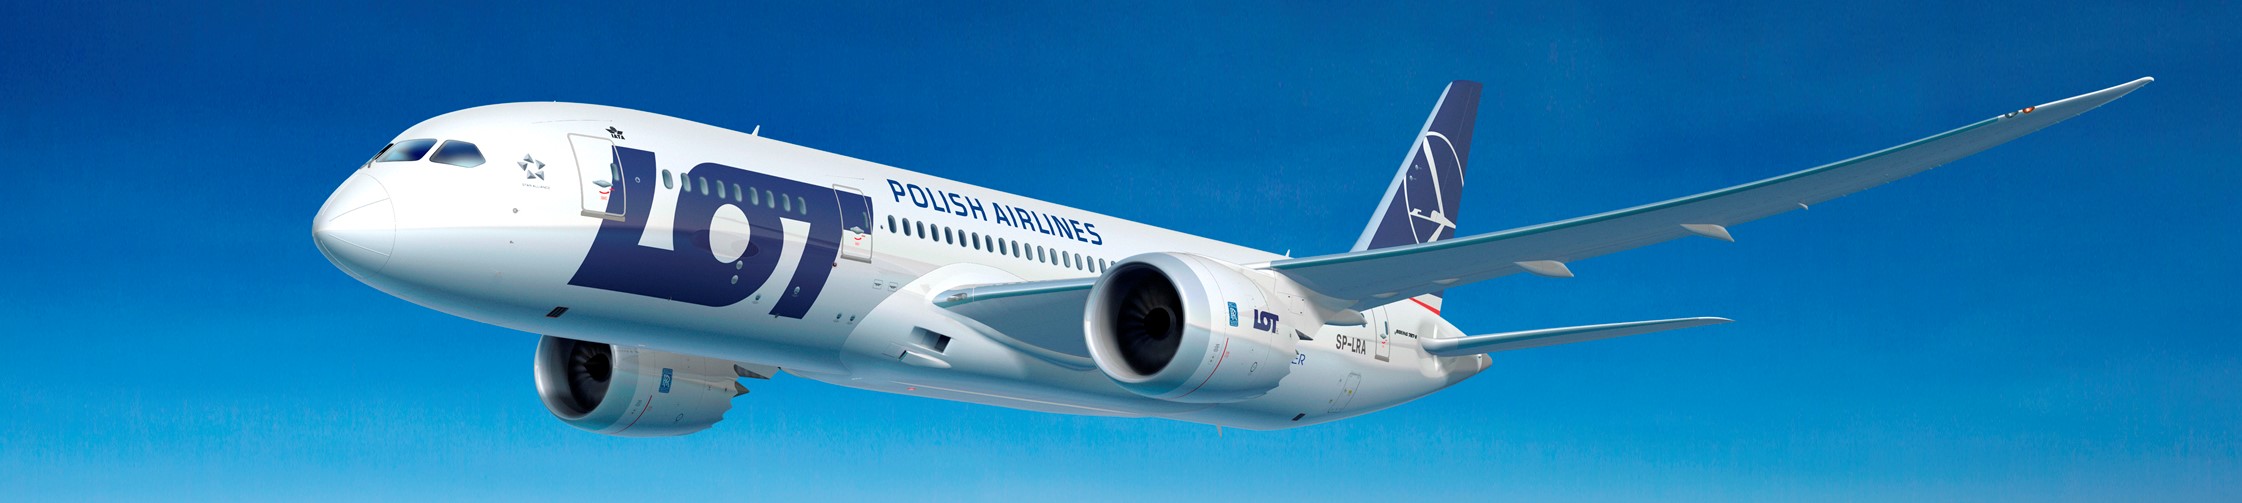 READER REVIEW: LOT Polish Airlines B787 Business Class review - Turning  left for less